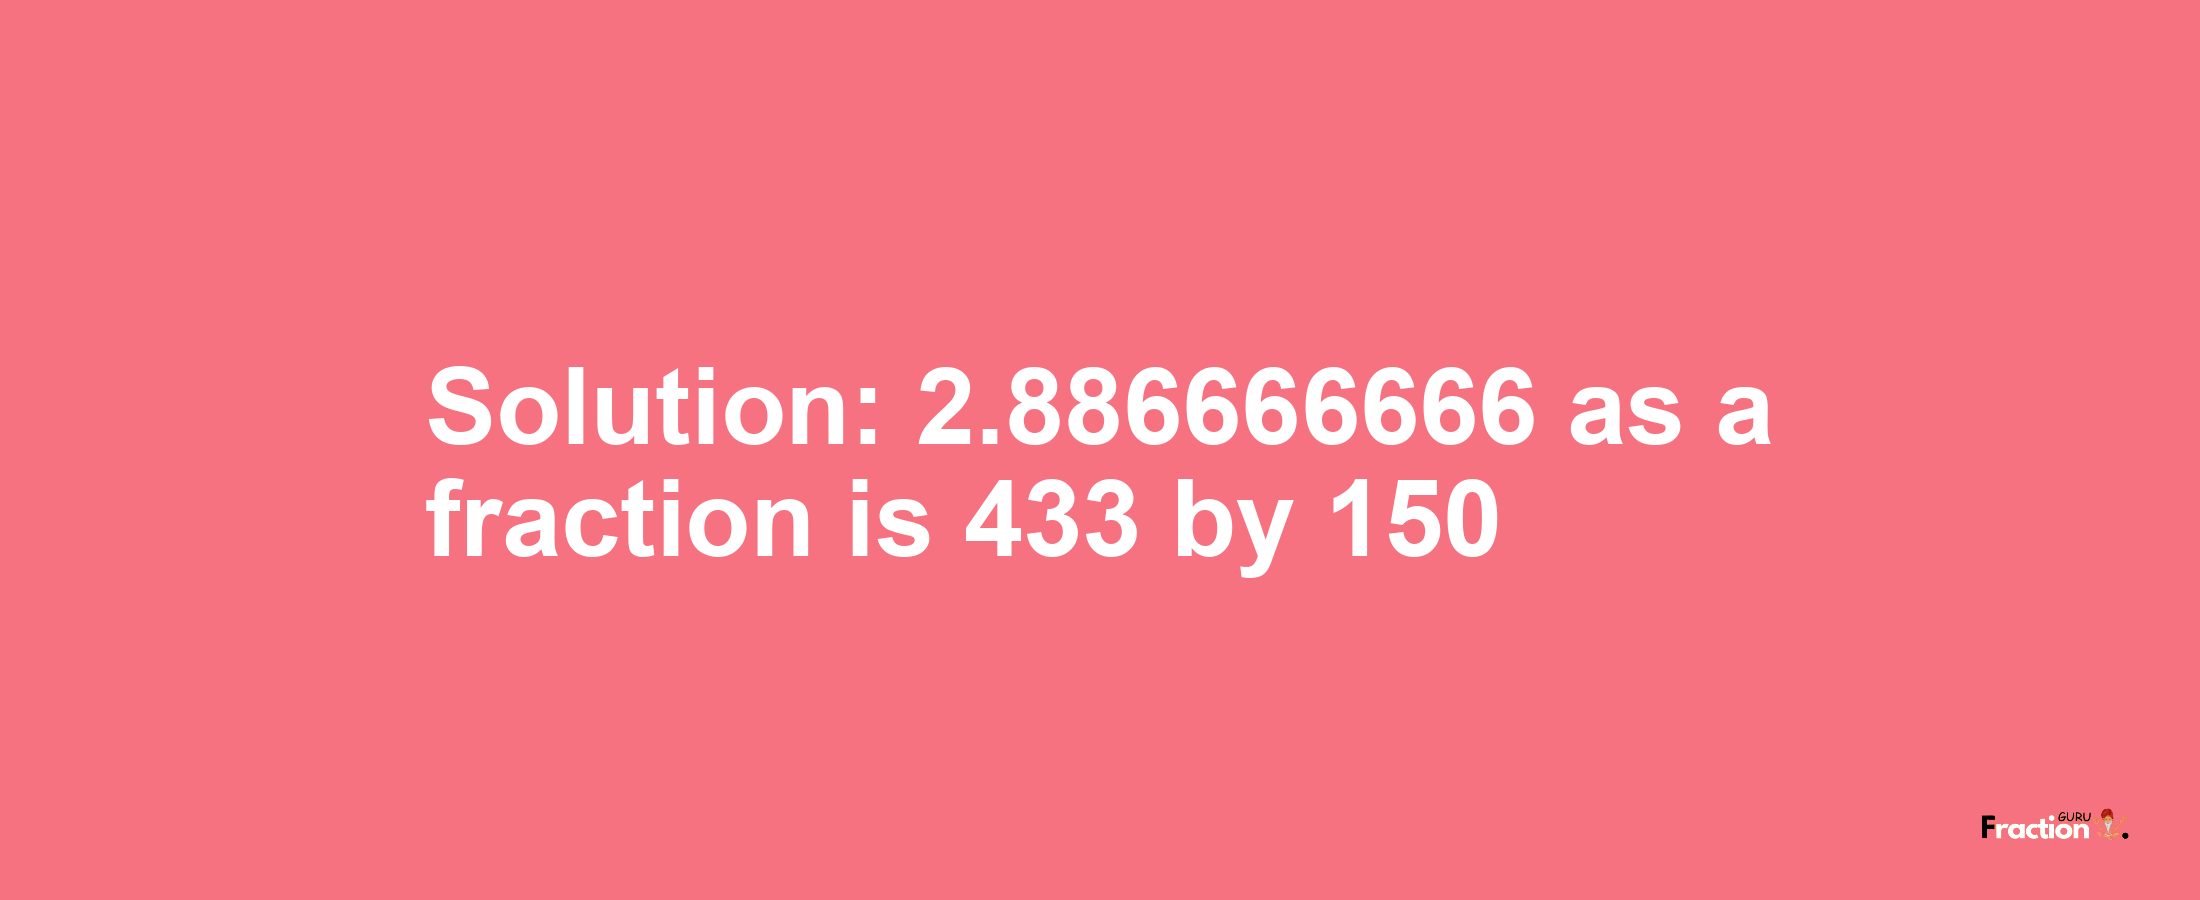 Solution:2.886666666 as a fraction is 433/150